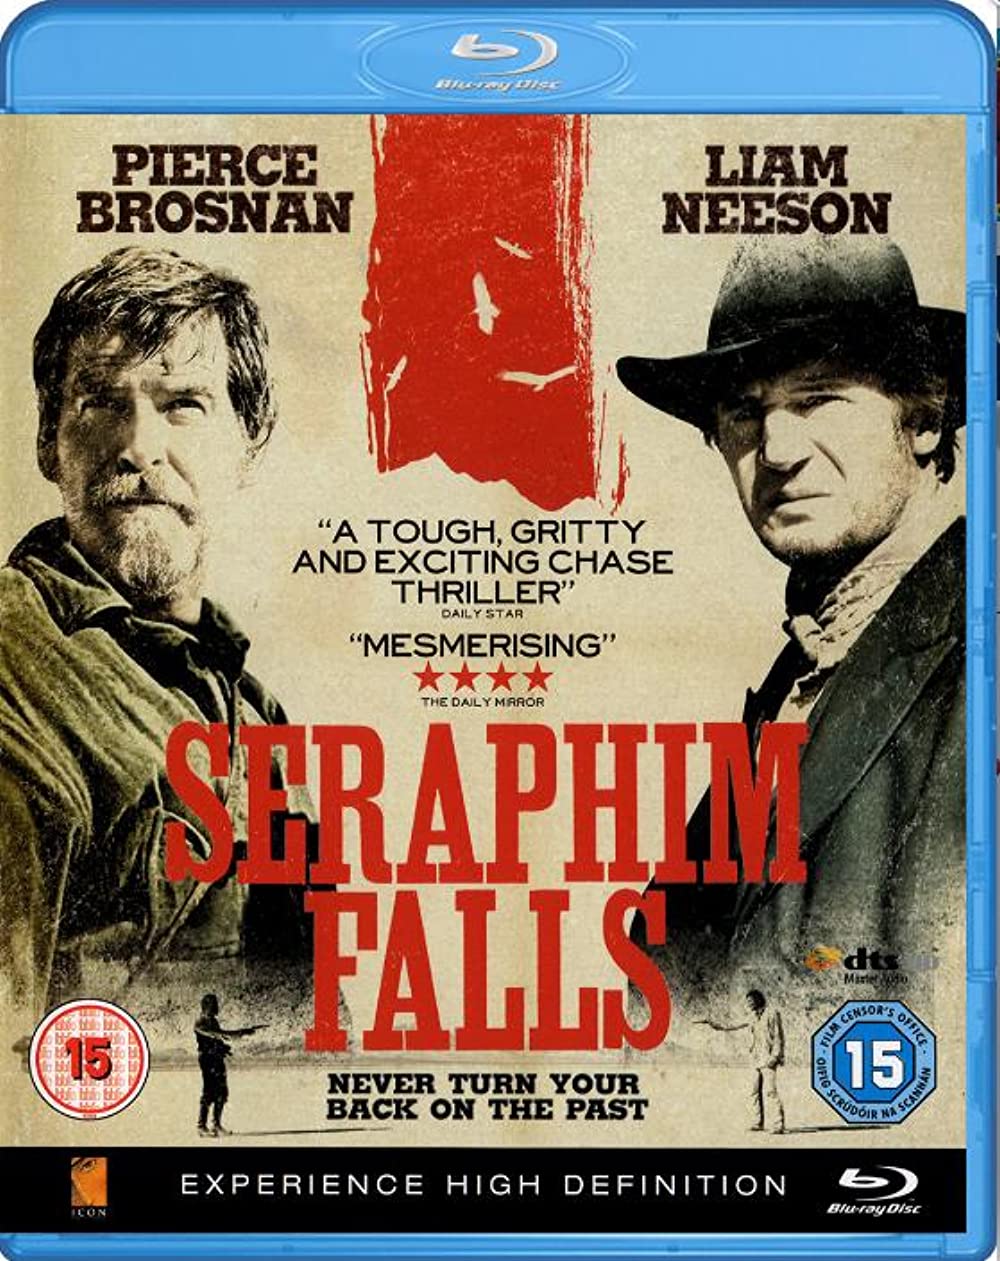 Download Behind the Scenes of 'Seraphim Falls' Movie | Behind The Scenes Of 'seraphim Falls' Movie Review